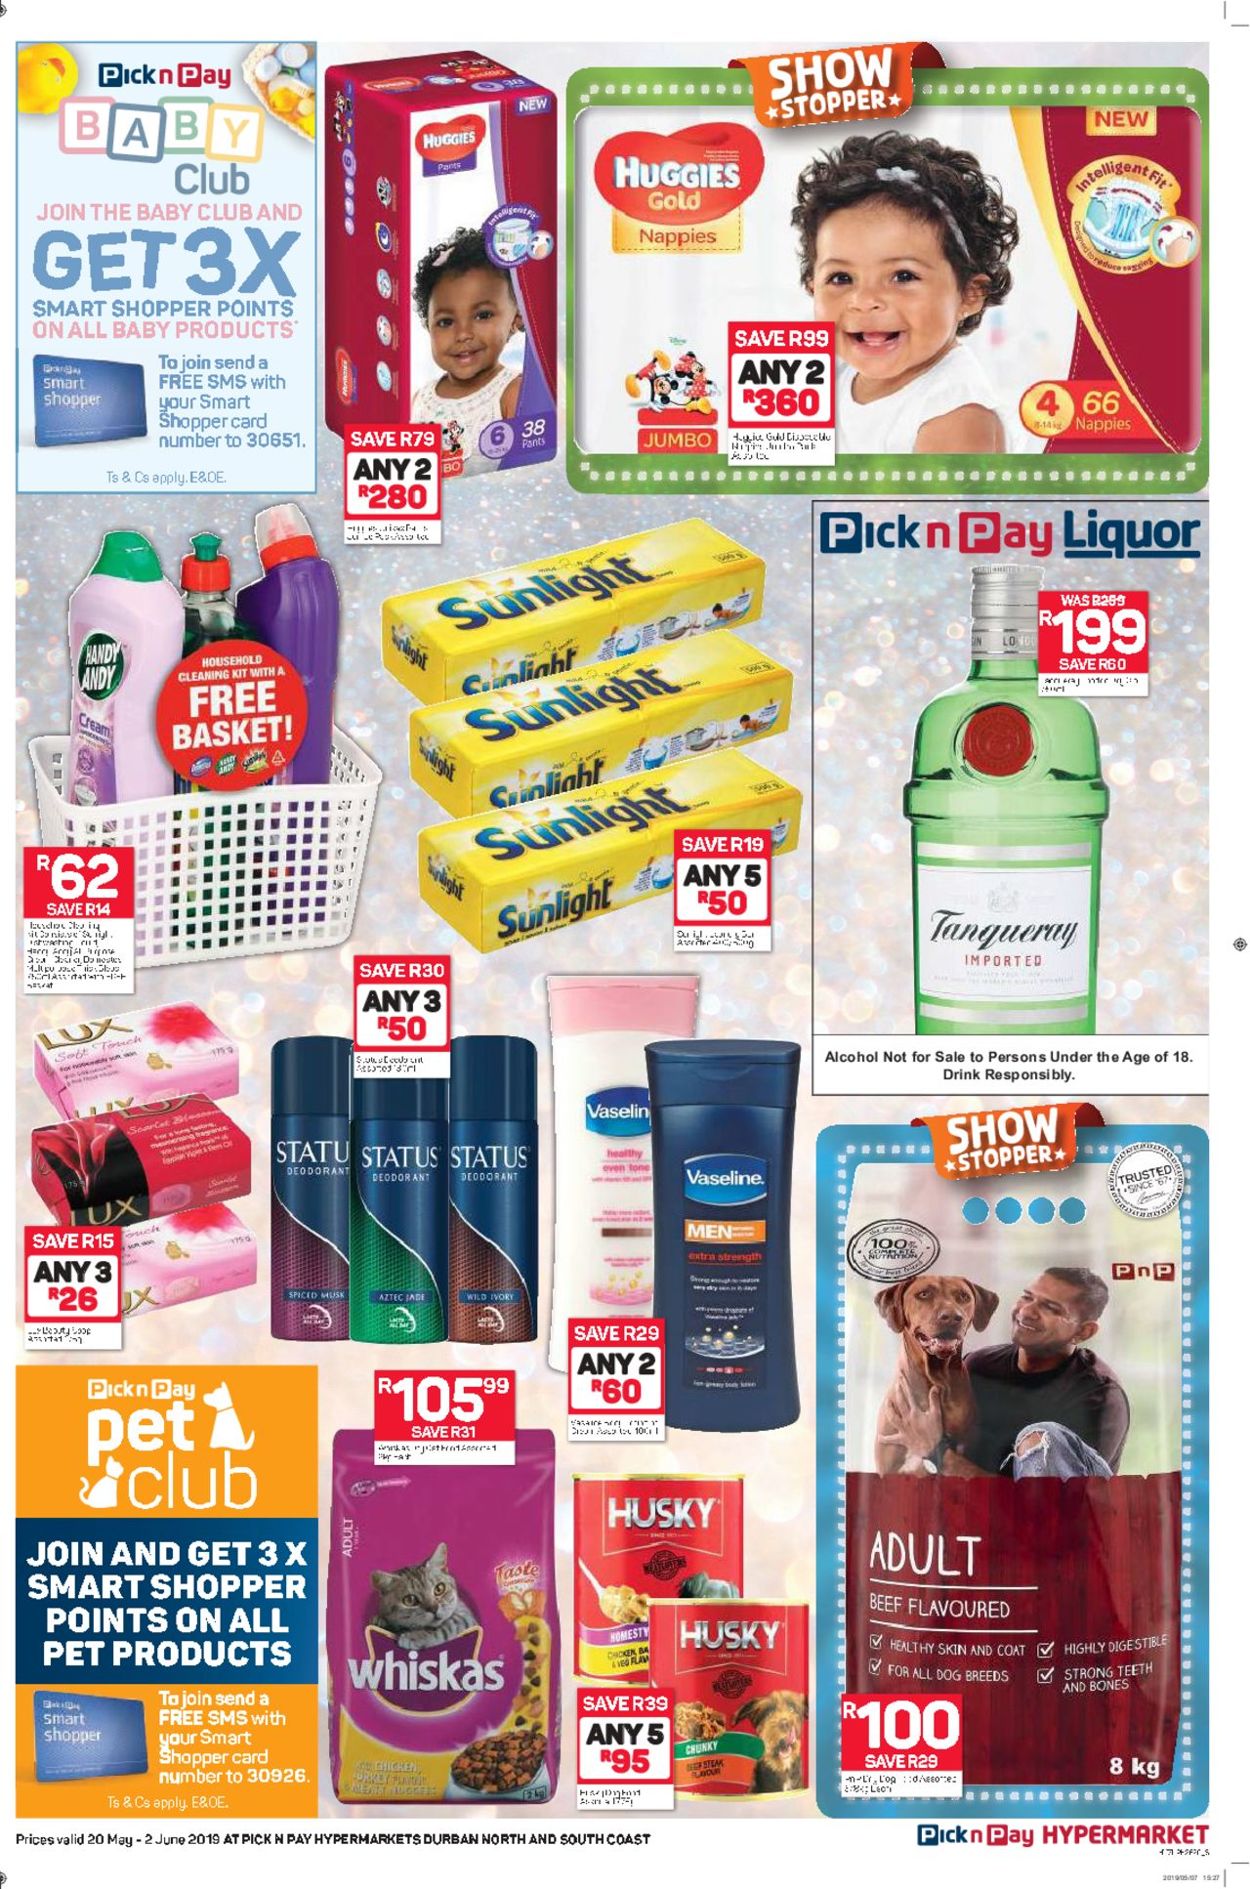 Pick n Pay Catalogue - 2019/05/20-2019/06/02 (Page 3)